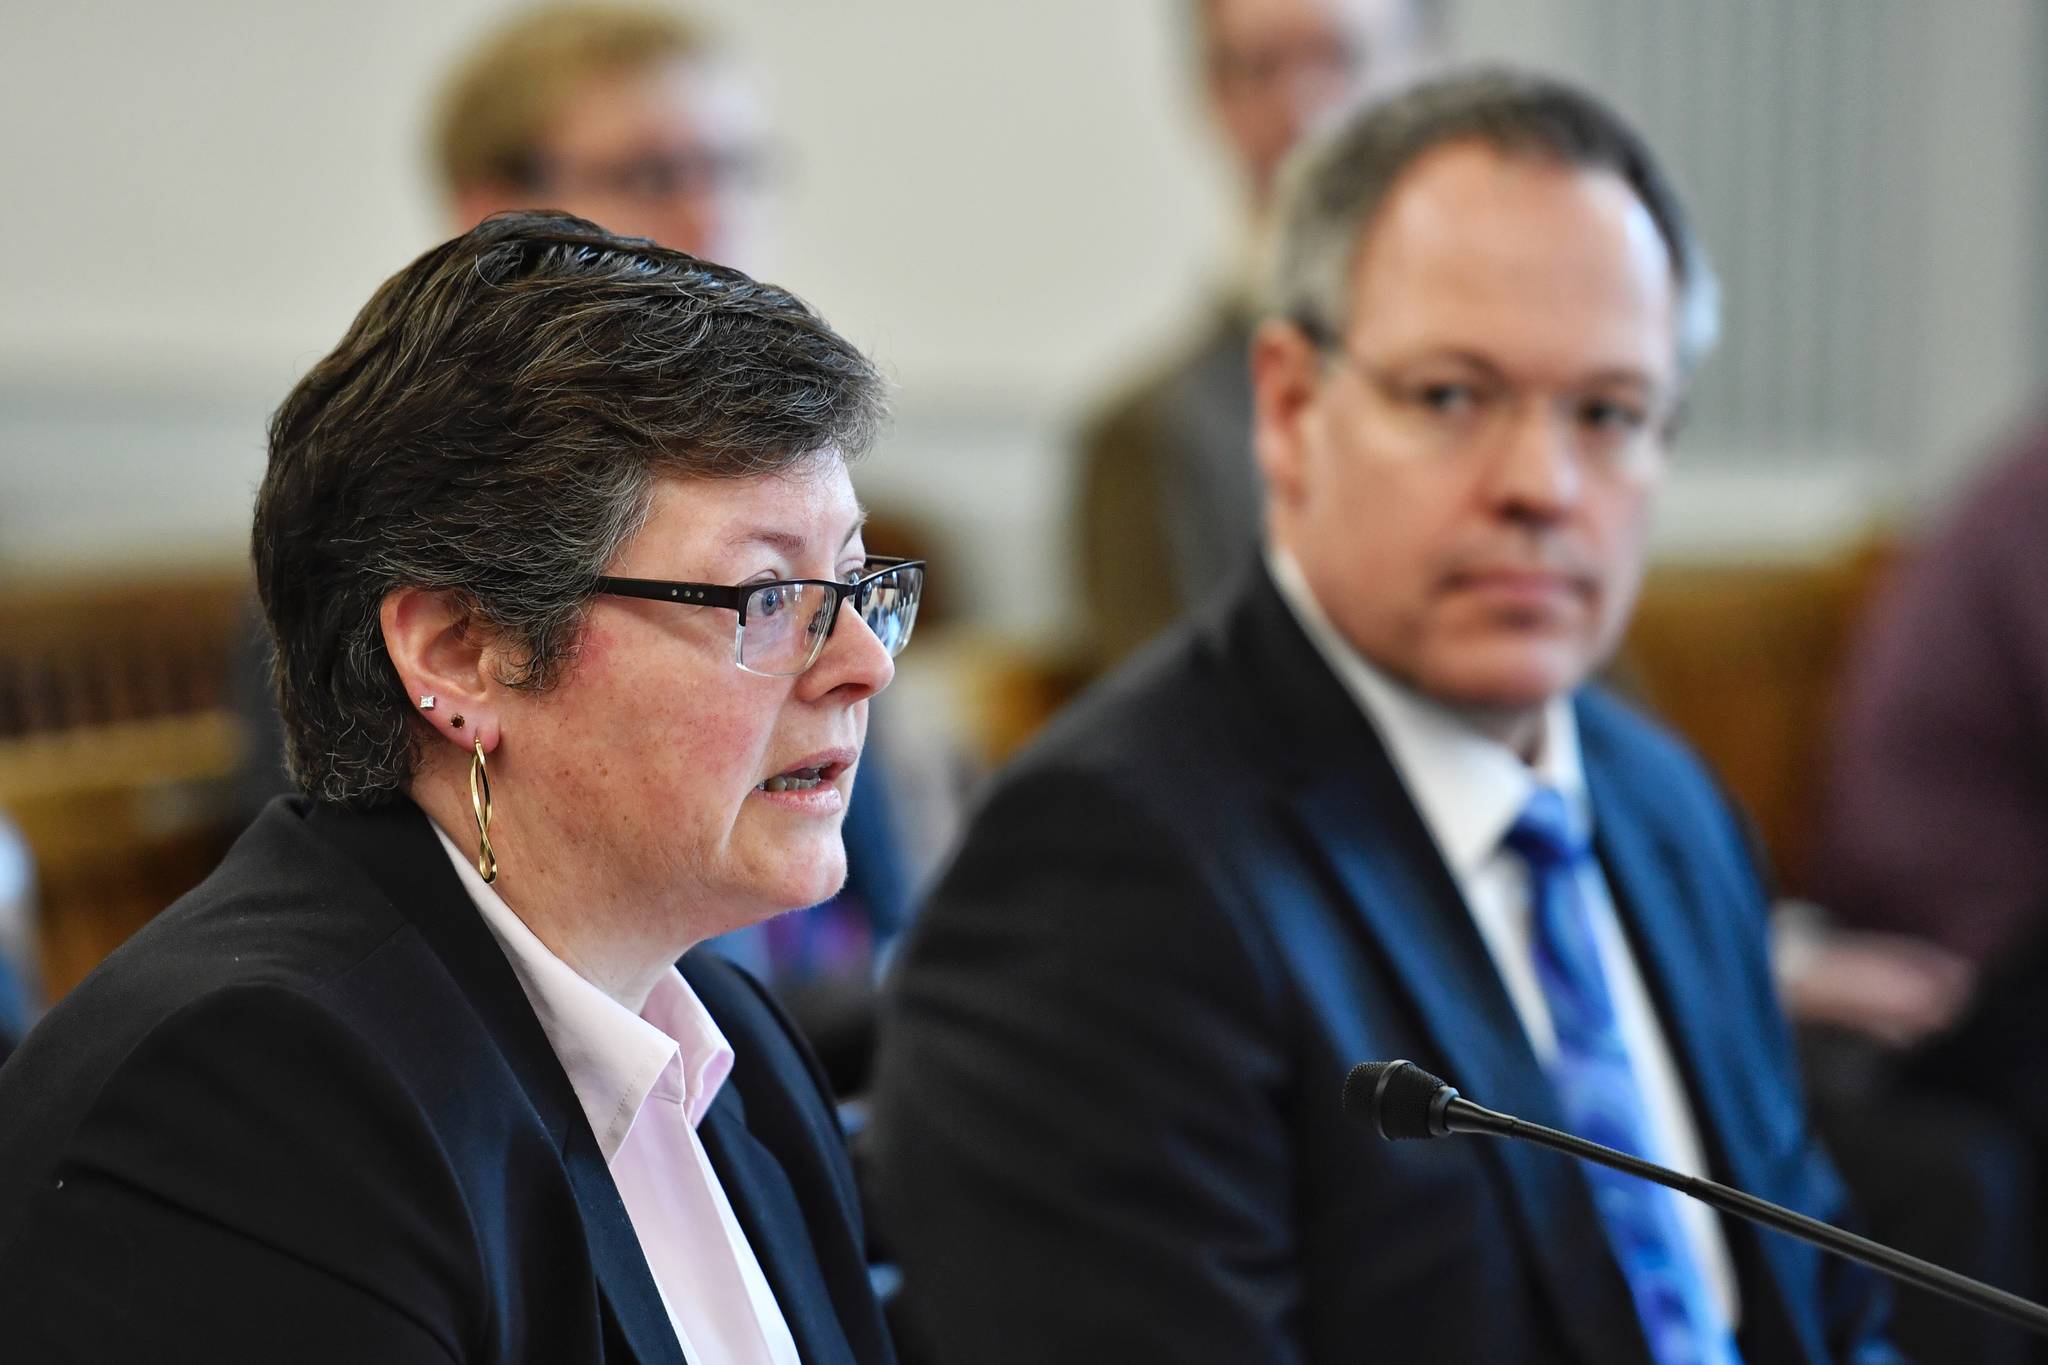 Michelle Prebula, an investment officer with the Department of Revenue, left, and Bruce Tangeman, Commissioner of Revenue, give a presentation on the state’s cash flow in front of the Senate Finance Committee on Thursday, Feb. 28, 2019. (Michael Penn | Juneau Empire)